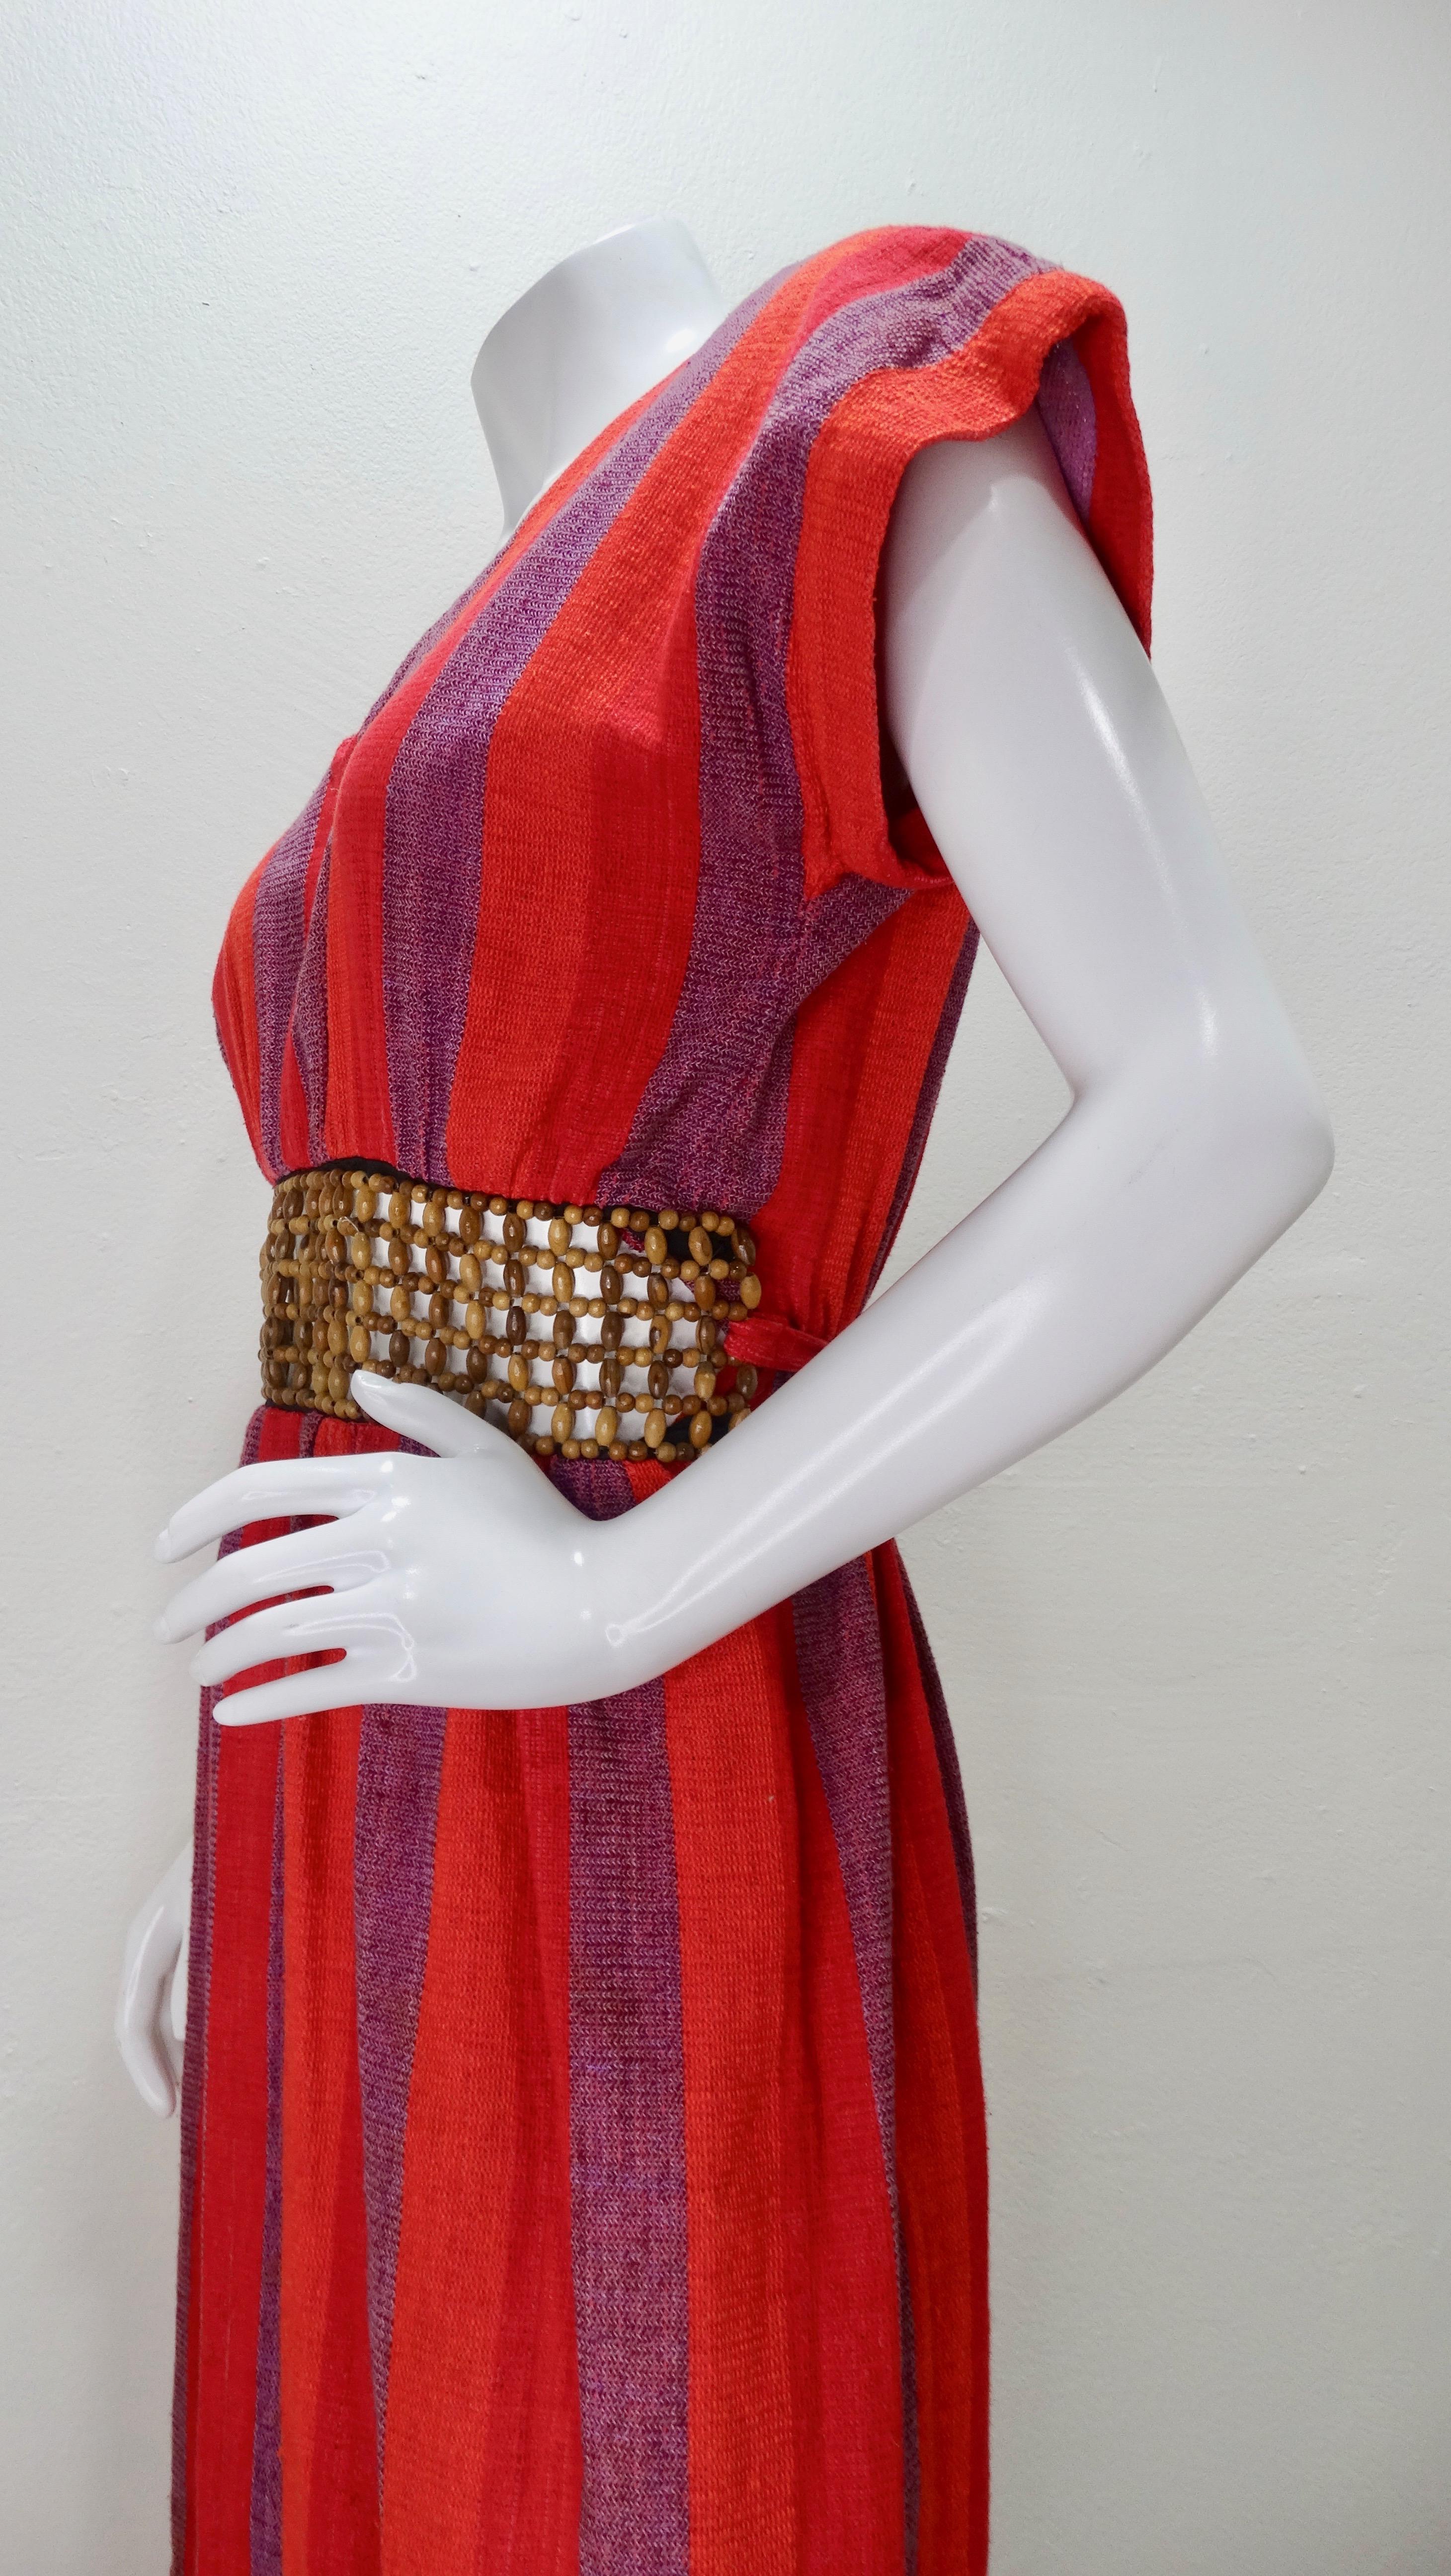 Your go-to dress is her, Circa 1970s! This Rikma maxi dress is made from 100% Cotton and features a vibrant three color stripe pattern (red, orange, purple), a v-neckline, a small slit on the back of skirt,  and a wooden macrame waist belt. Includes